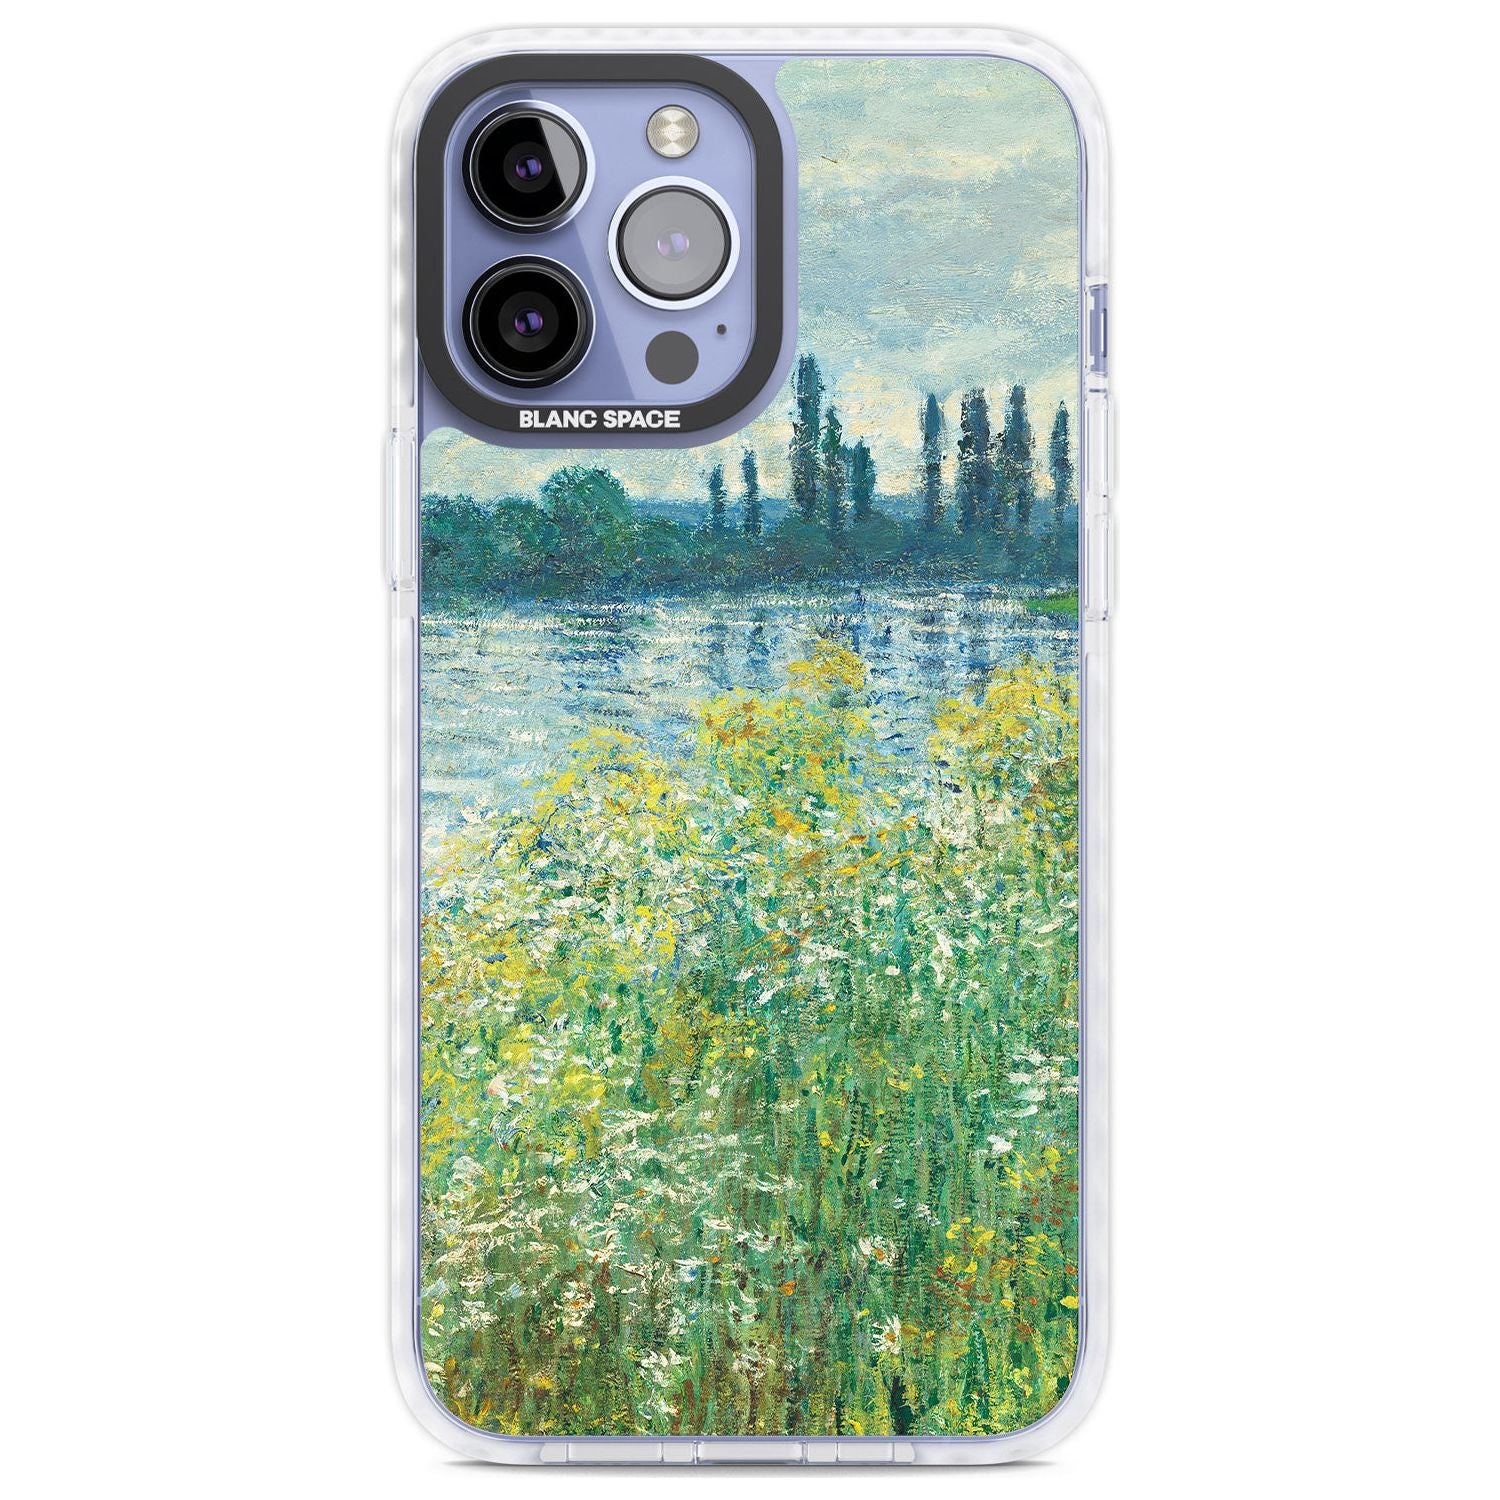 Banks of the Seine by Claude Monet Phone Case iPhone 13 Pro Max / Impact Case,iPhone 14 Pro Max / Impact Case Blanc Space